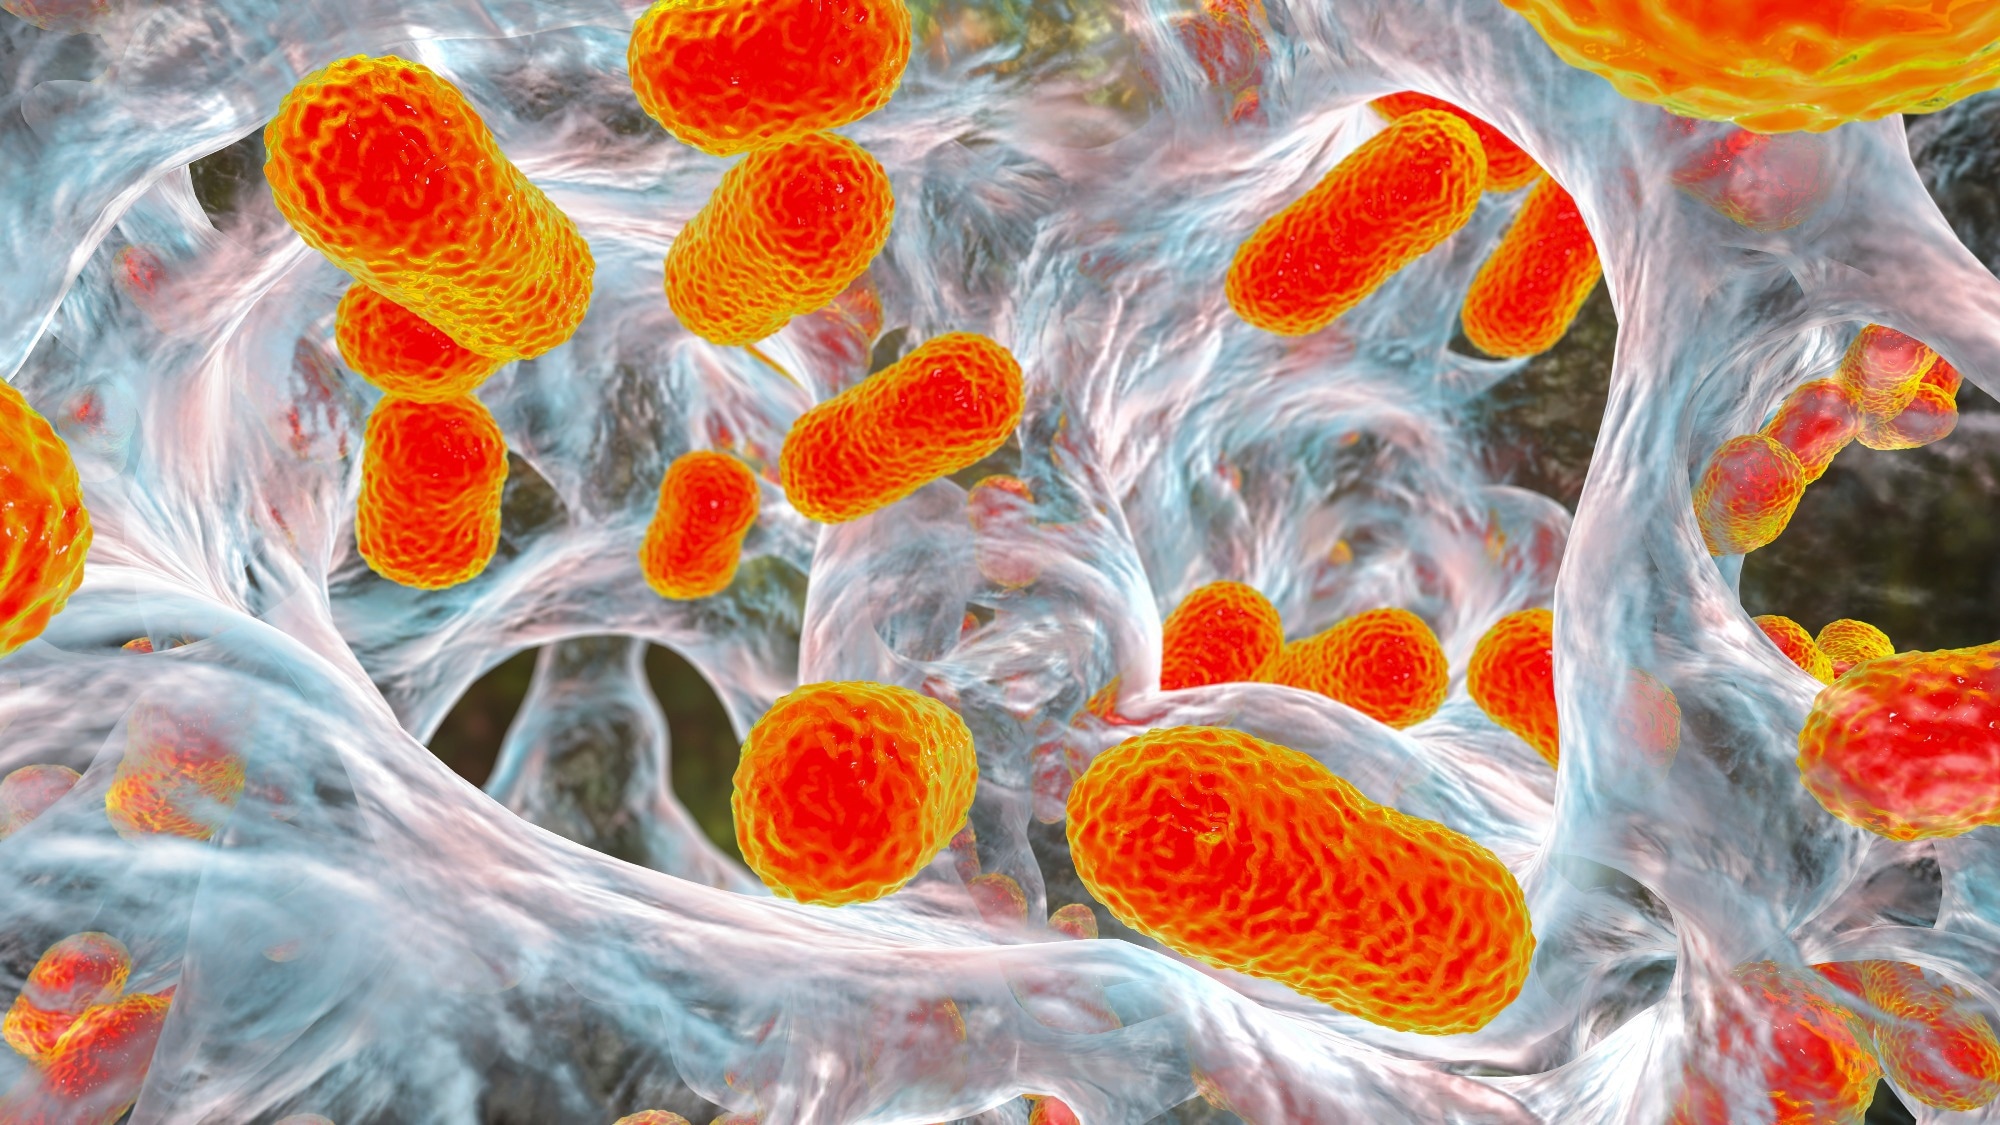 Study: Increasing number of cases and outbreaks caused by Candida auris in the EU/EEA, 2020 to 2021. Image Credit: Kateryna Kon/Shutterstock